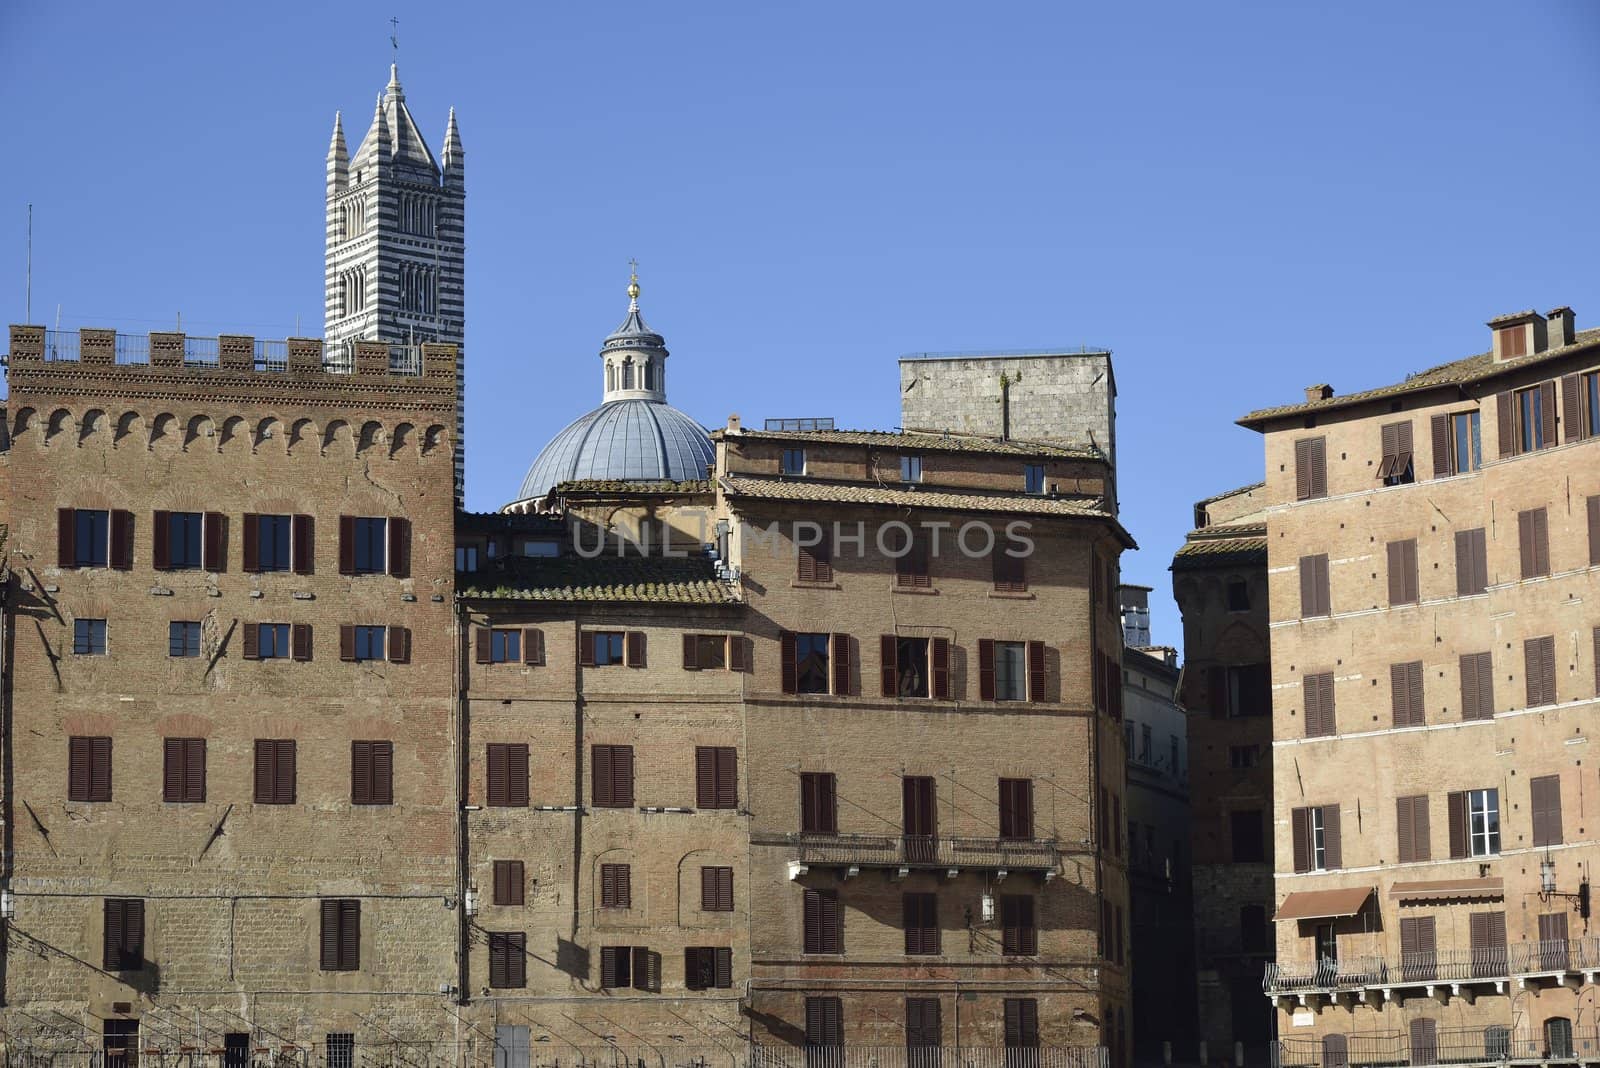 Siena (Italy) is one of the most beautiful medieval european town